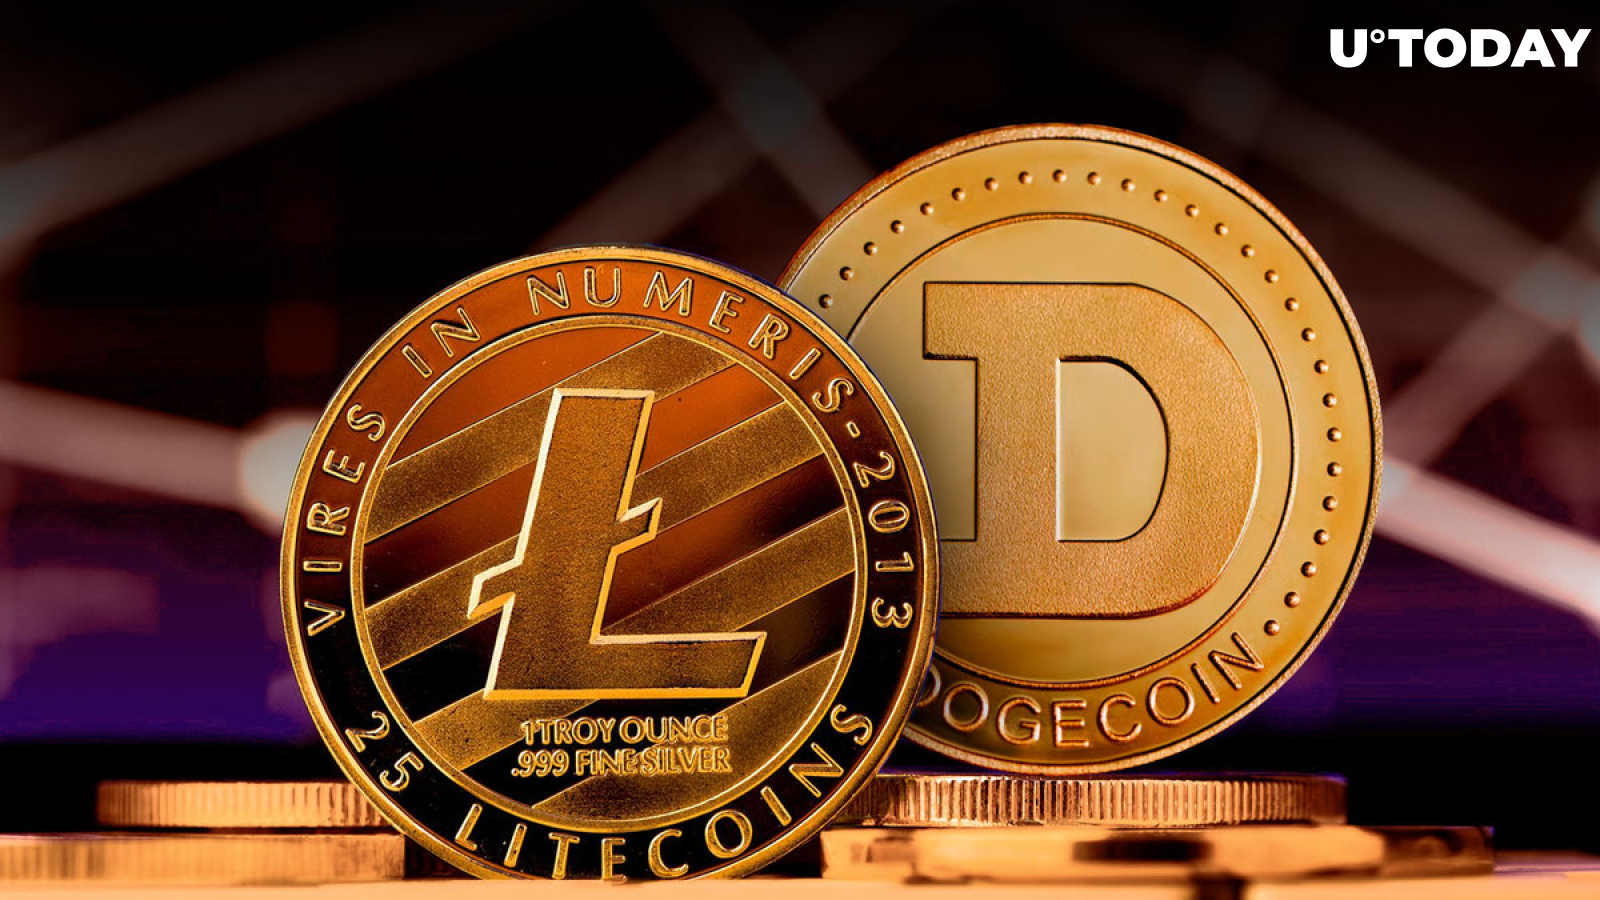 Dogecoin (DOGE), Litecoin (LTC) and Others Are Victims of This Phenomenon